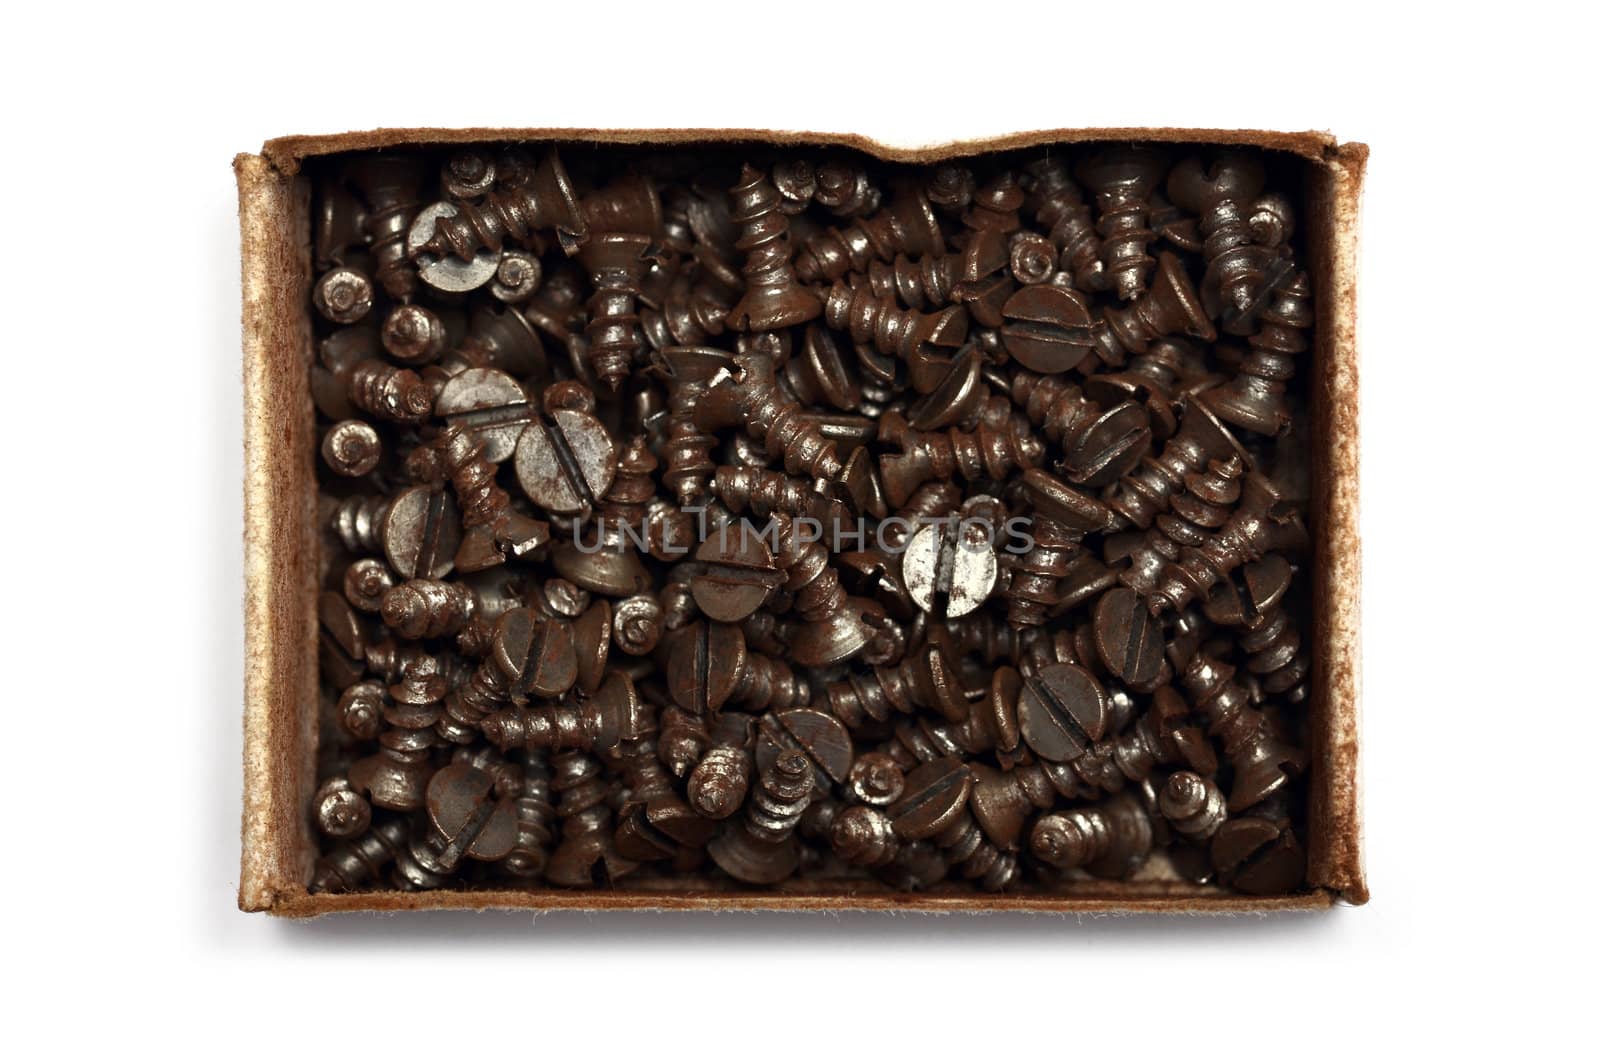 box of screws on a white background